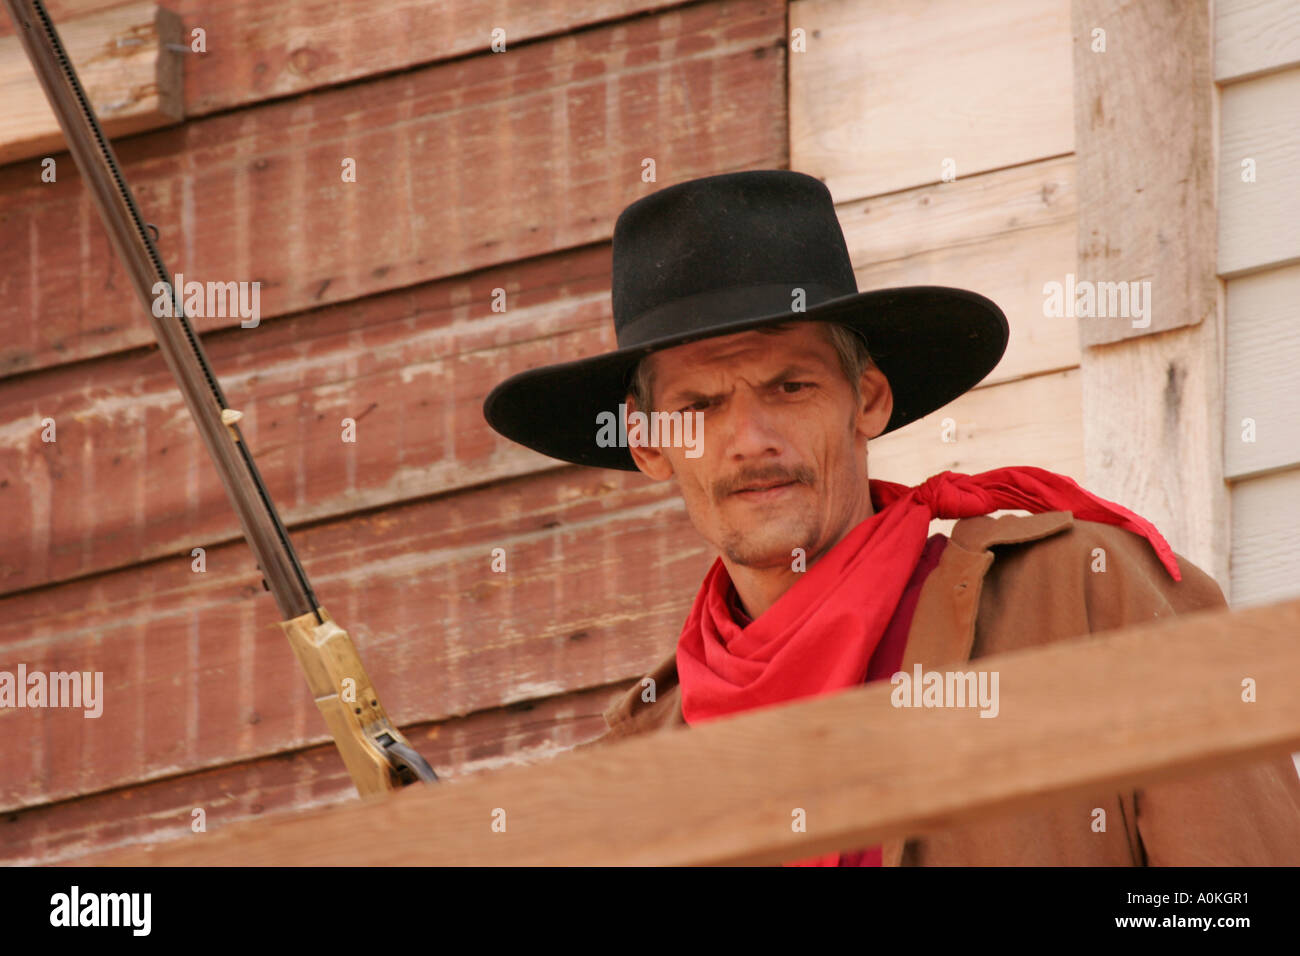 A cowboy with a gun on a balcony of old building during reenactment Stock Photo